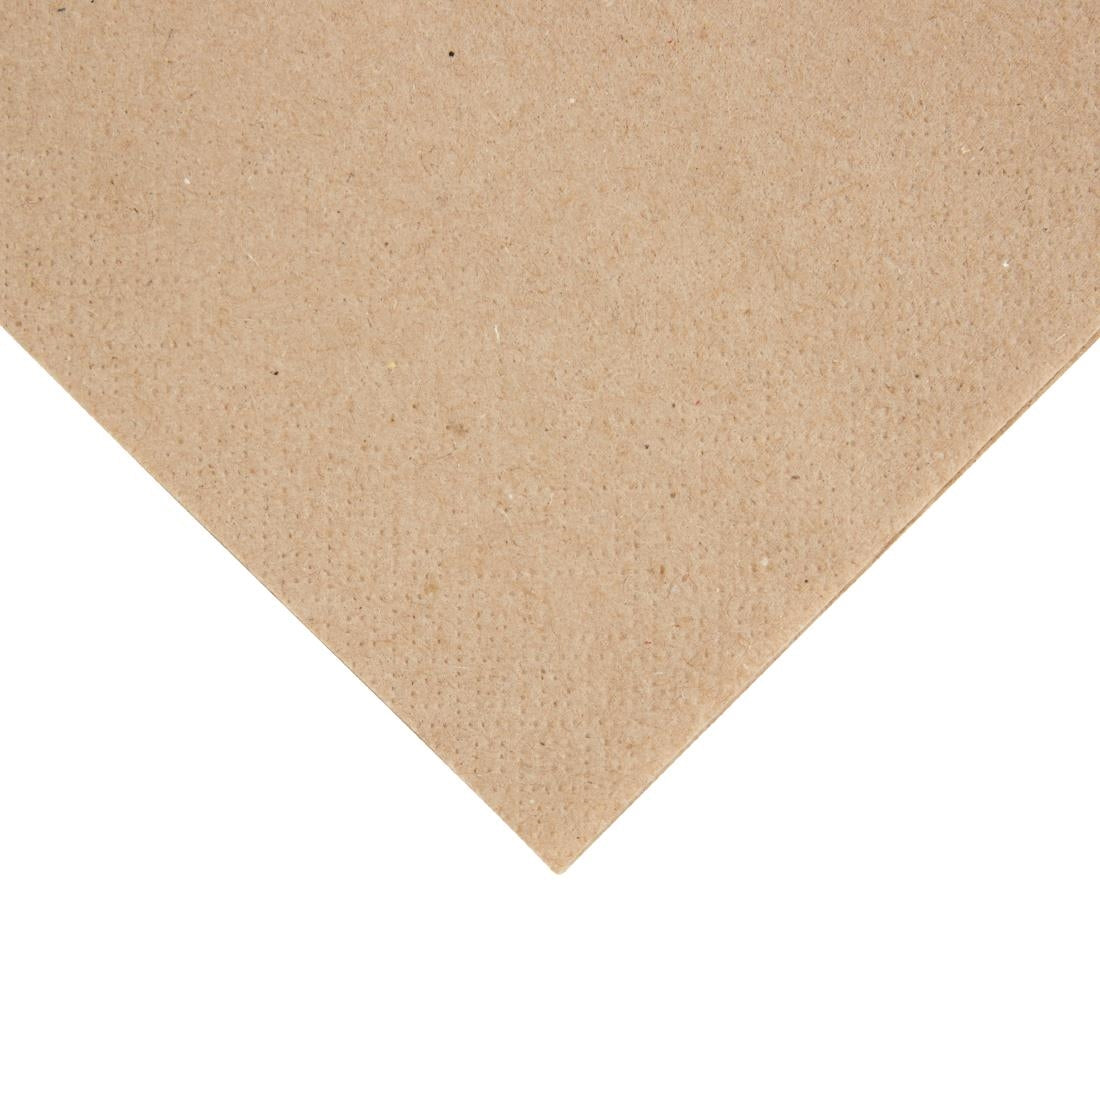 KRAFT RECYCLED NAPKIN – 2 PLY (Pack of 100)